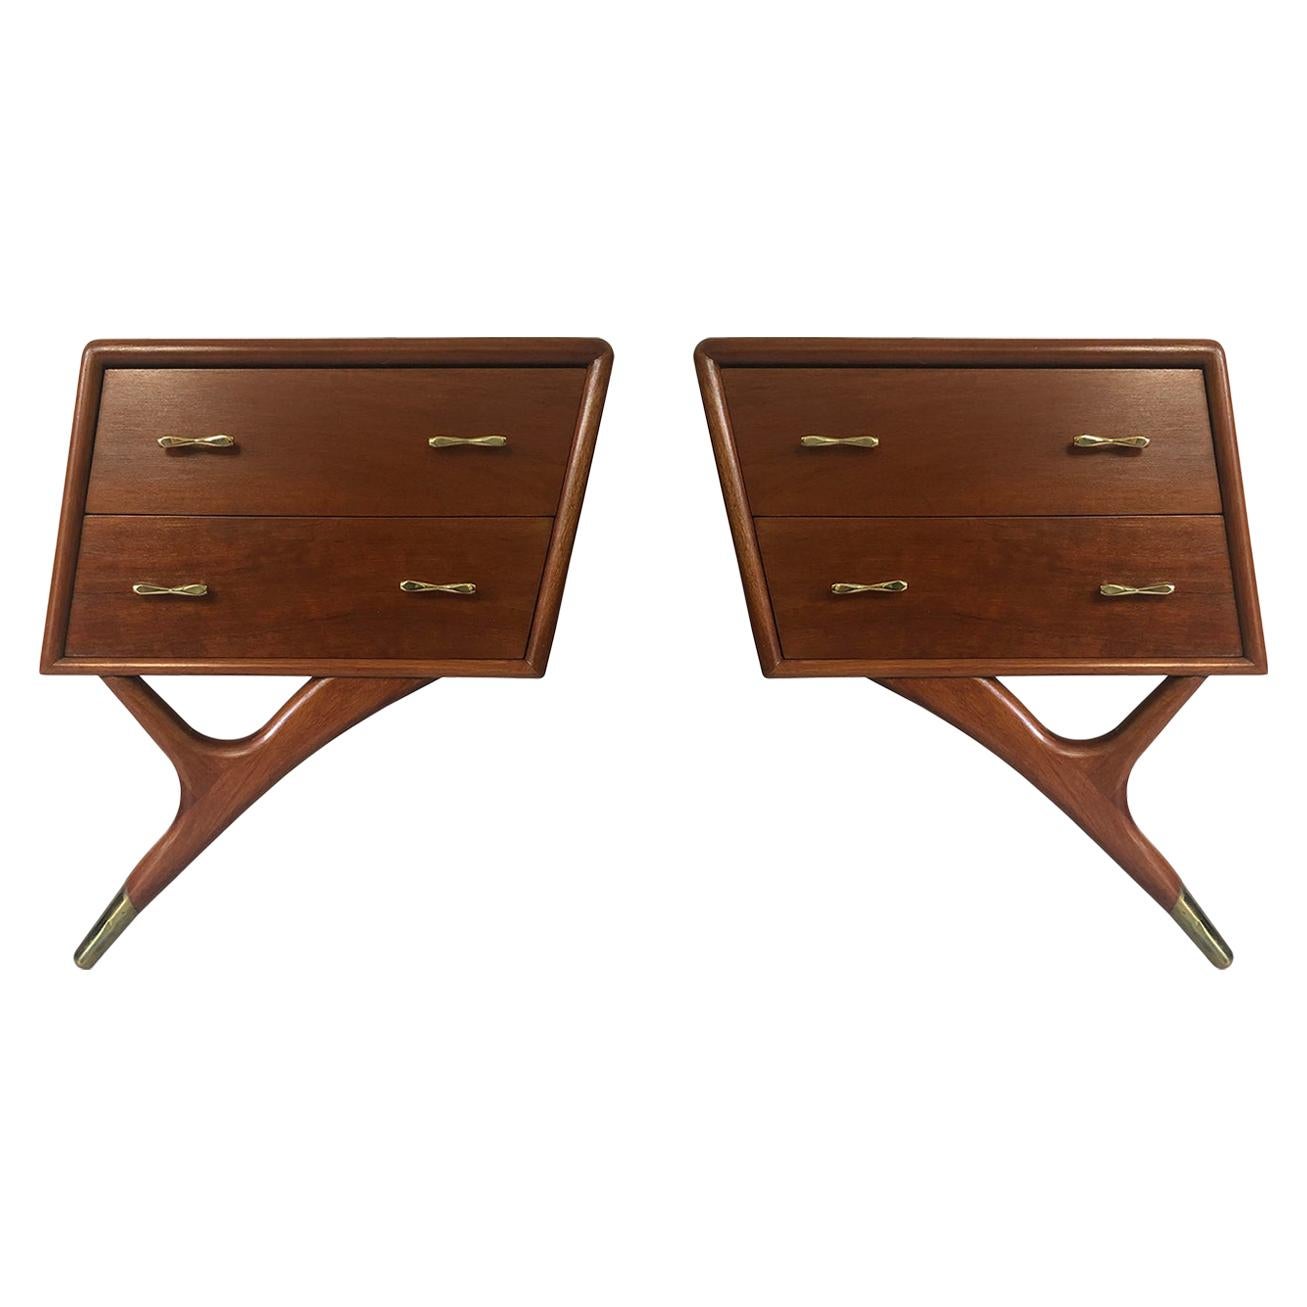 Mahogany and Brass Nightstands with Exceptional Leg by Eugenio Escudero